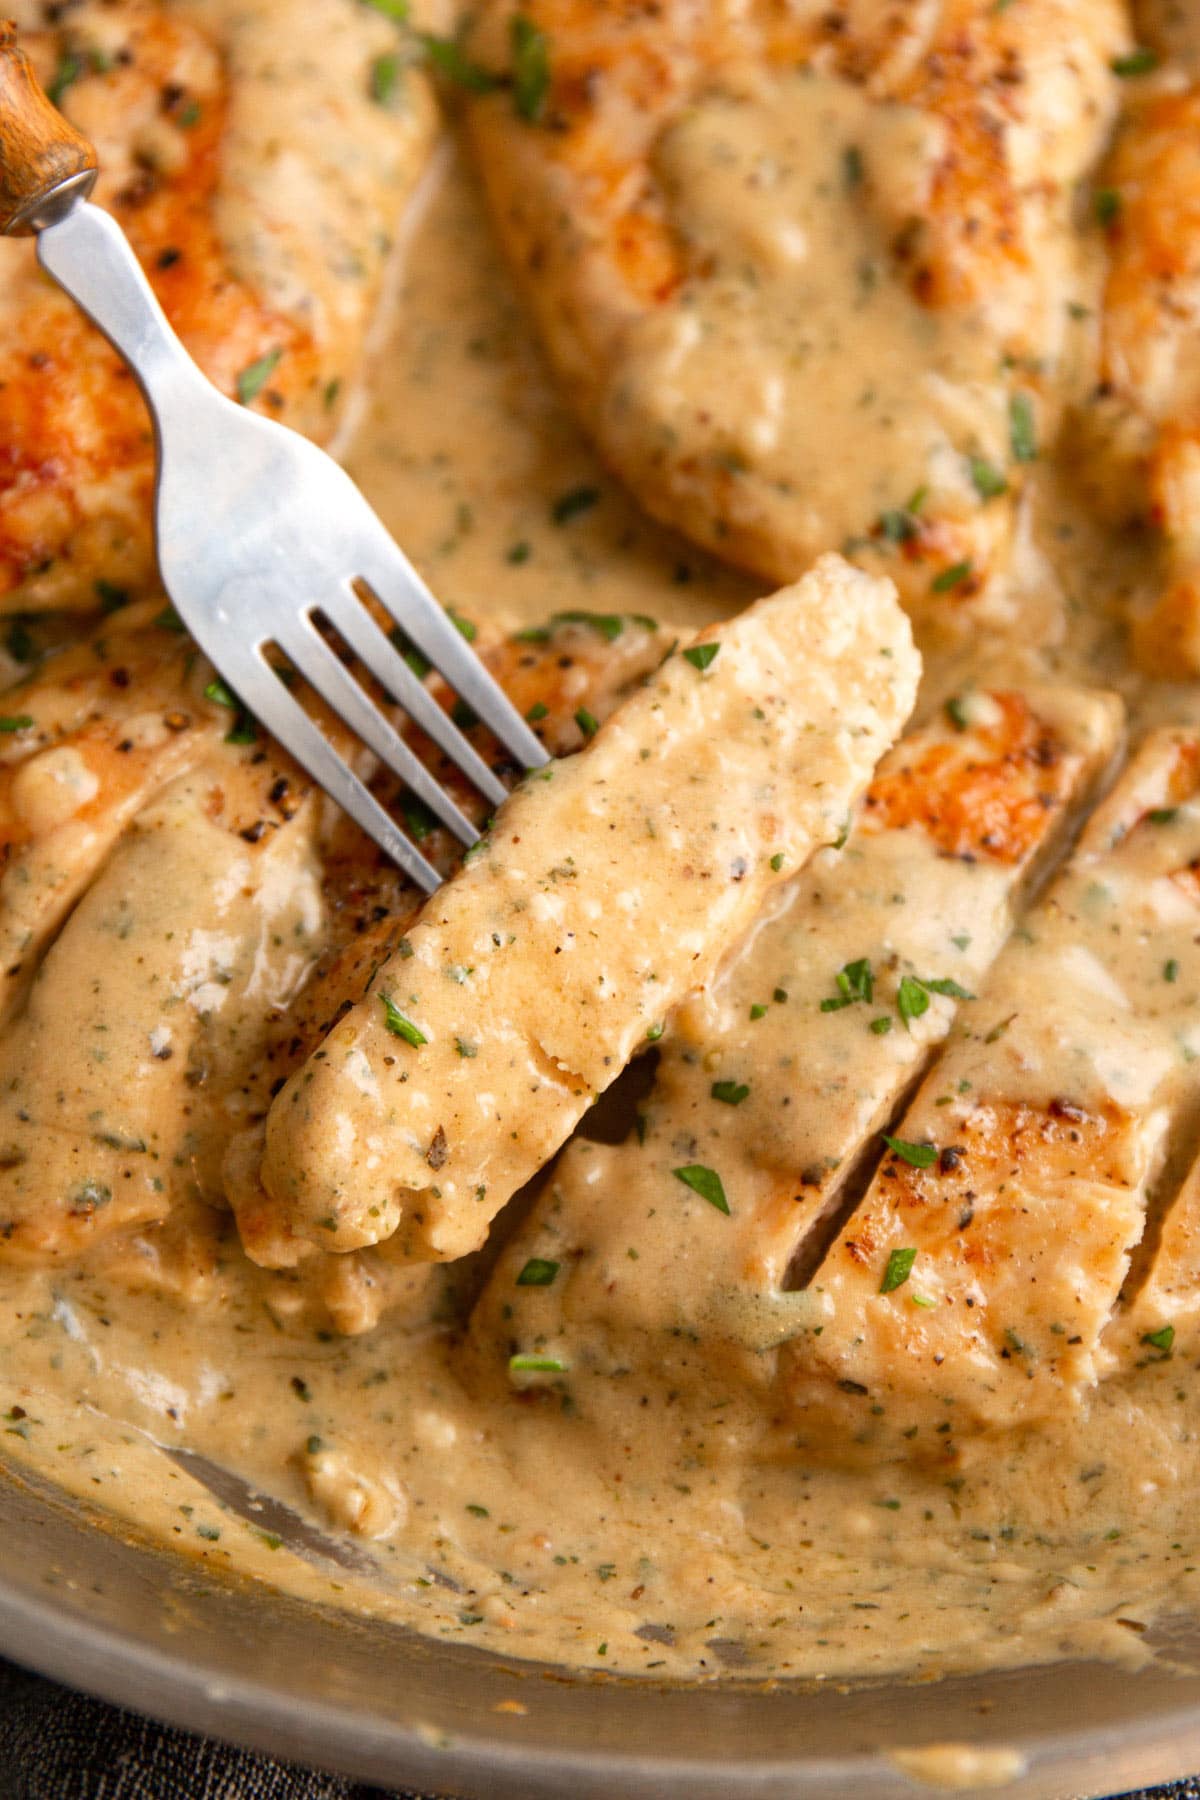 Creamy ranch chicken sliced into bite-sized pieces and smothered in sauce and topped with chopped fresh parsley.